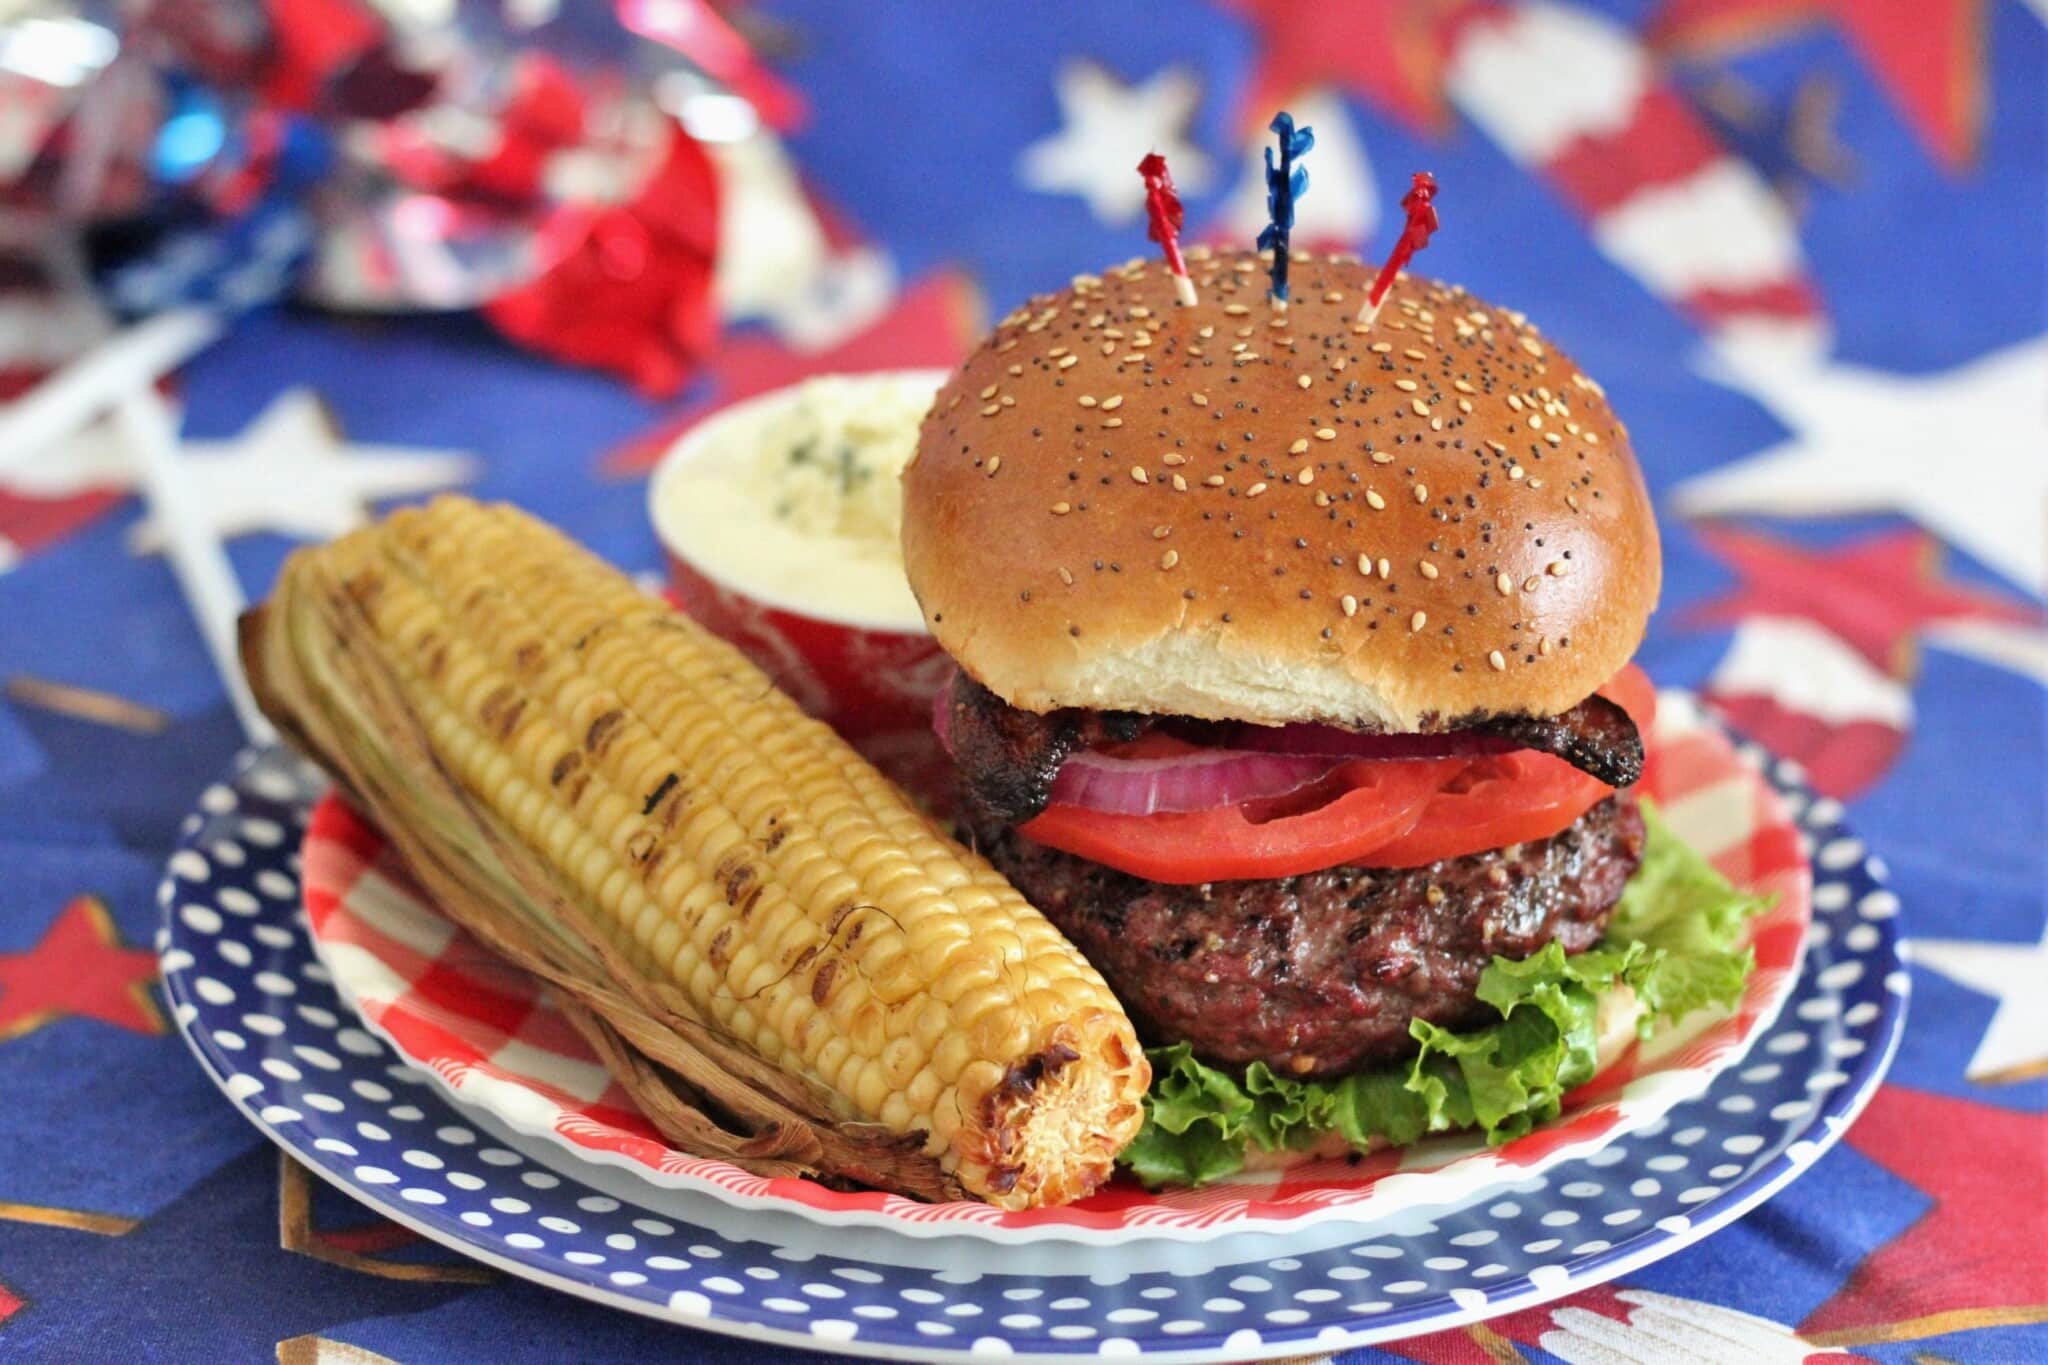 assembled stuffed burger on a red plate with whole grilled corn.